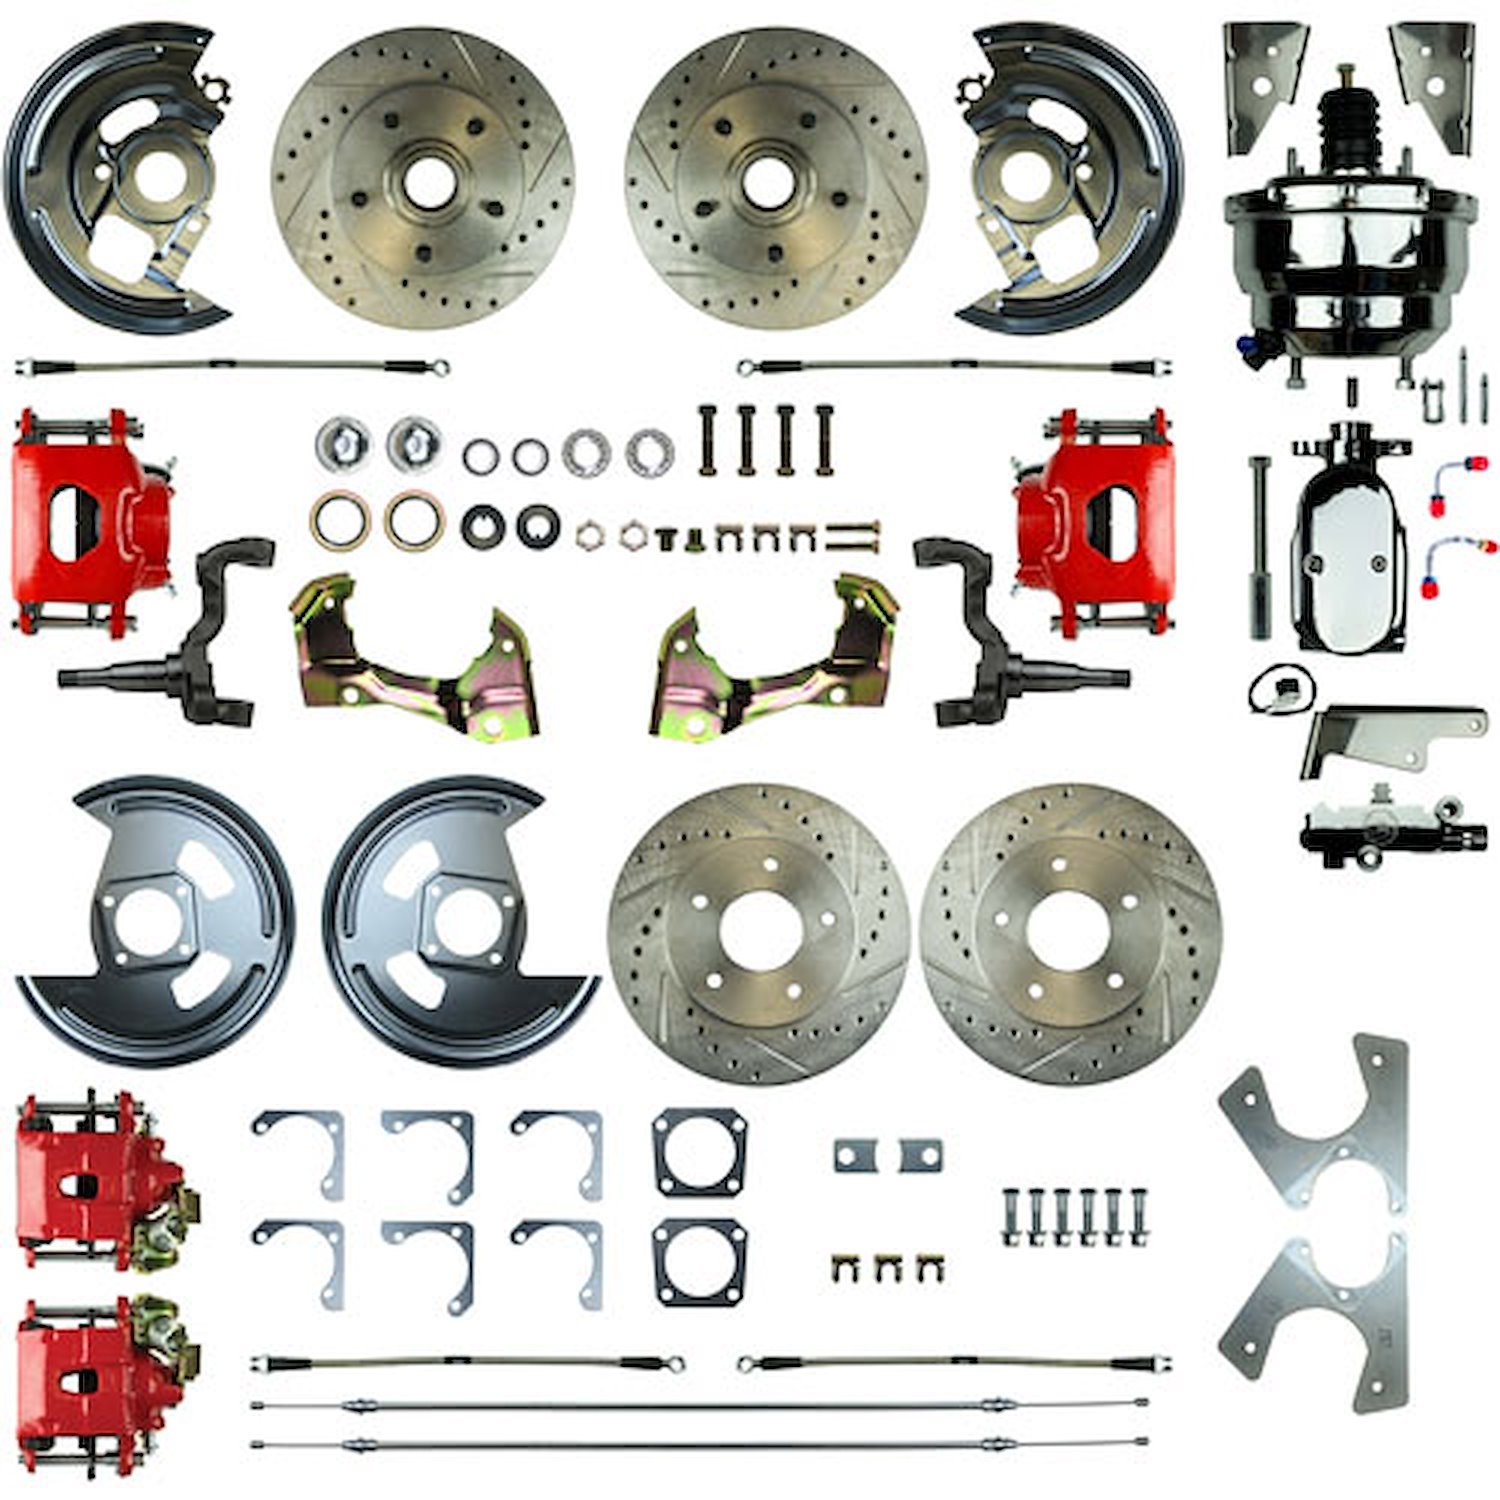 64 - "72 A Body GM, Chrome Booster, Red Show"N Go - Power 4 Wheel Disc Conversion